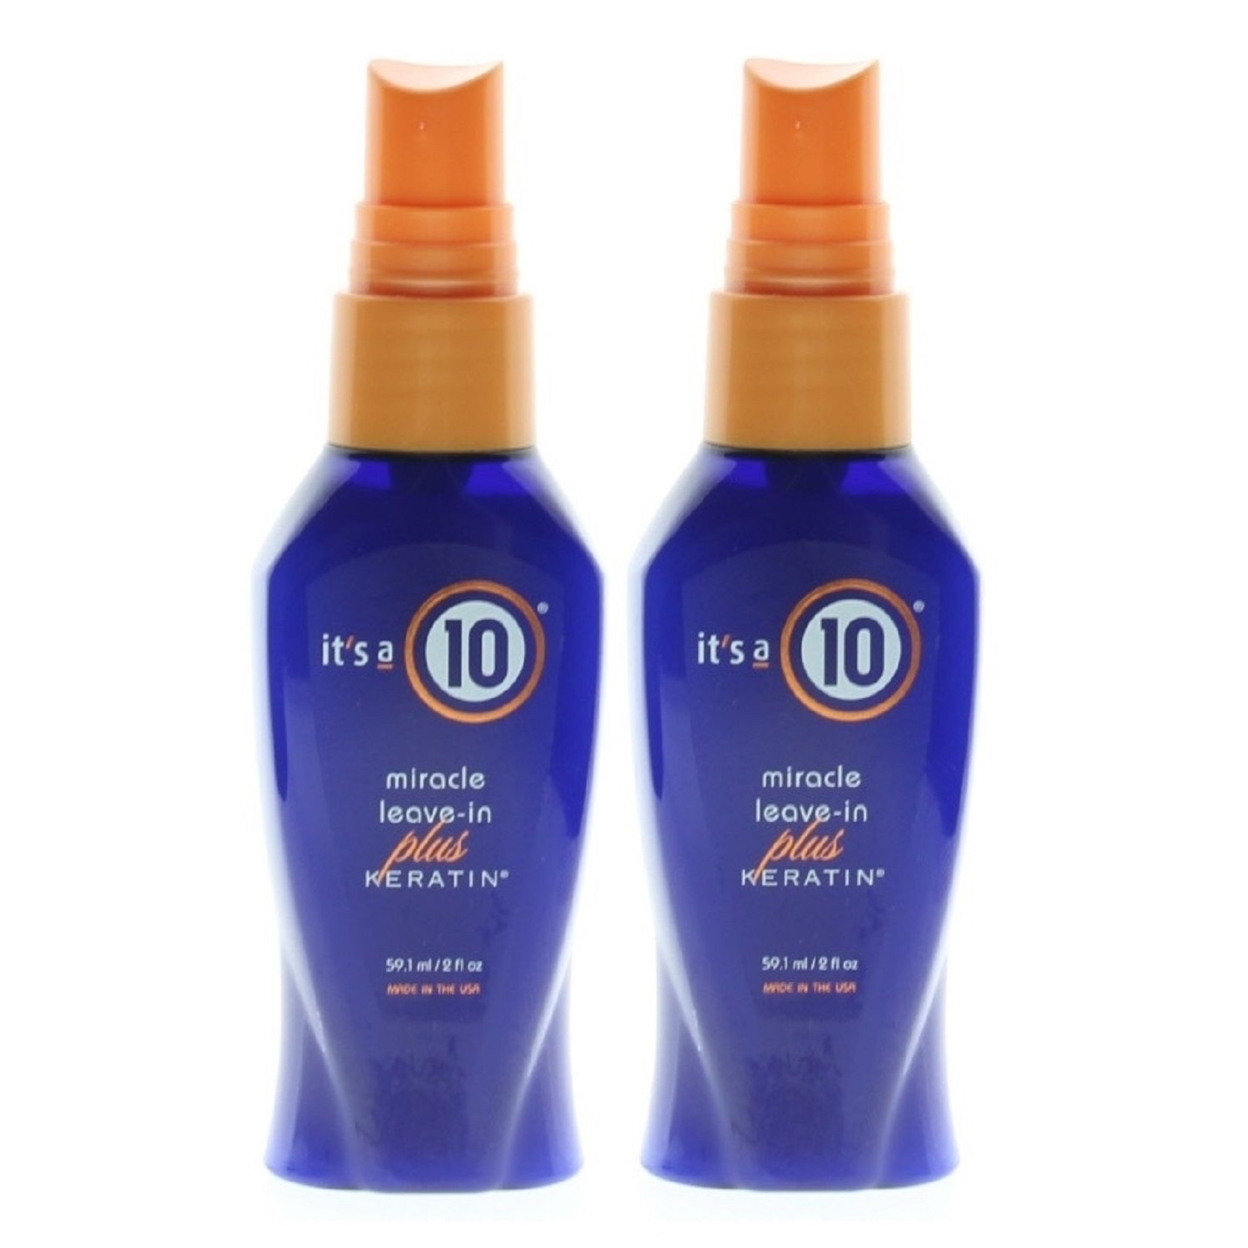 It's A 10 Miracle Leave-In Plus Keratin 2.0oz (2 Pack)